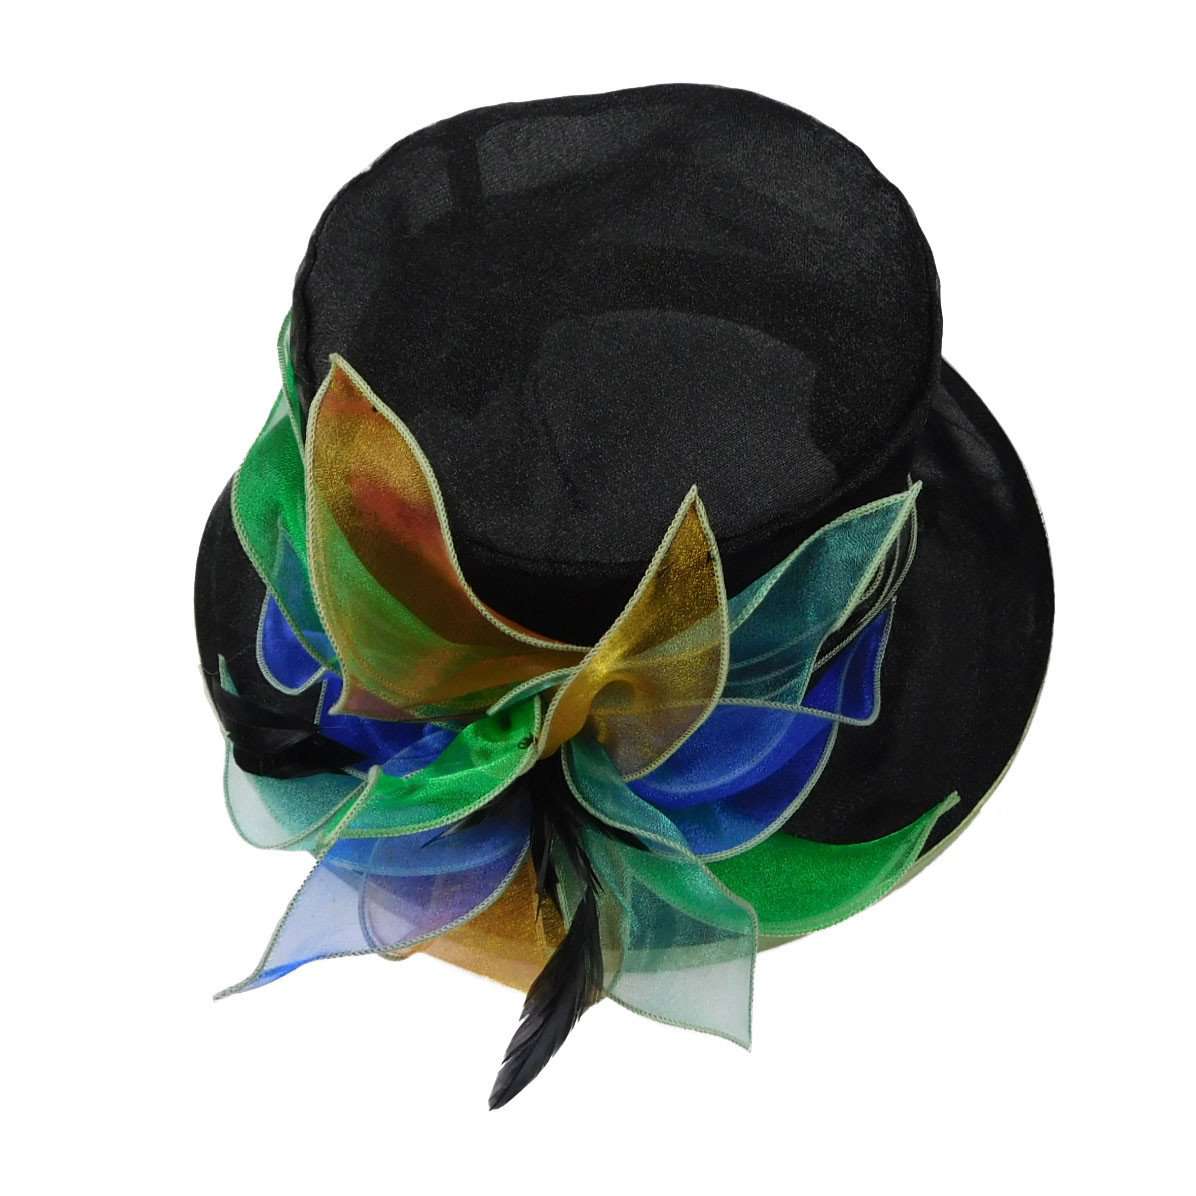 Black Organza Hat with Green Satin Trim - Jeanne Simmons Hats Dress Hat Jeanne Simmons    